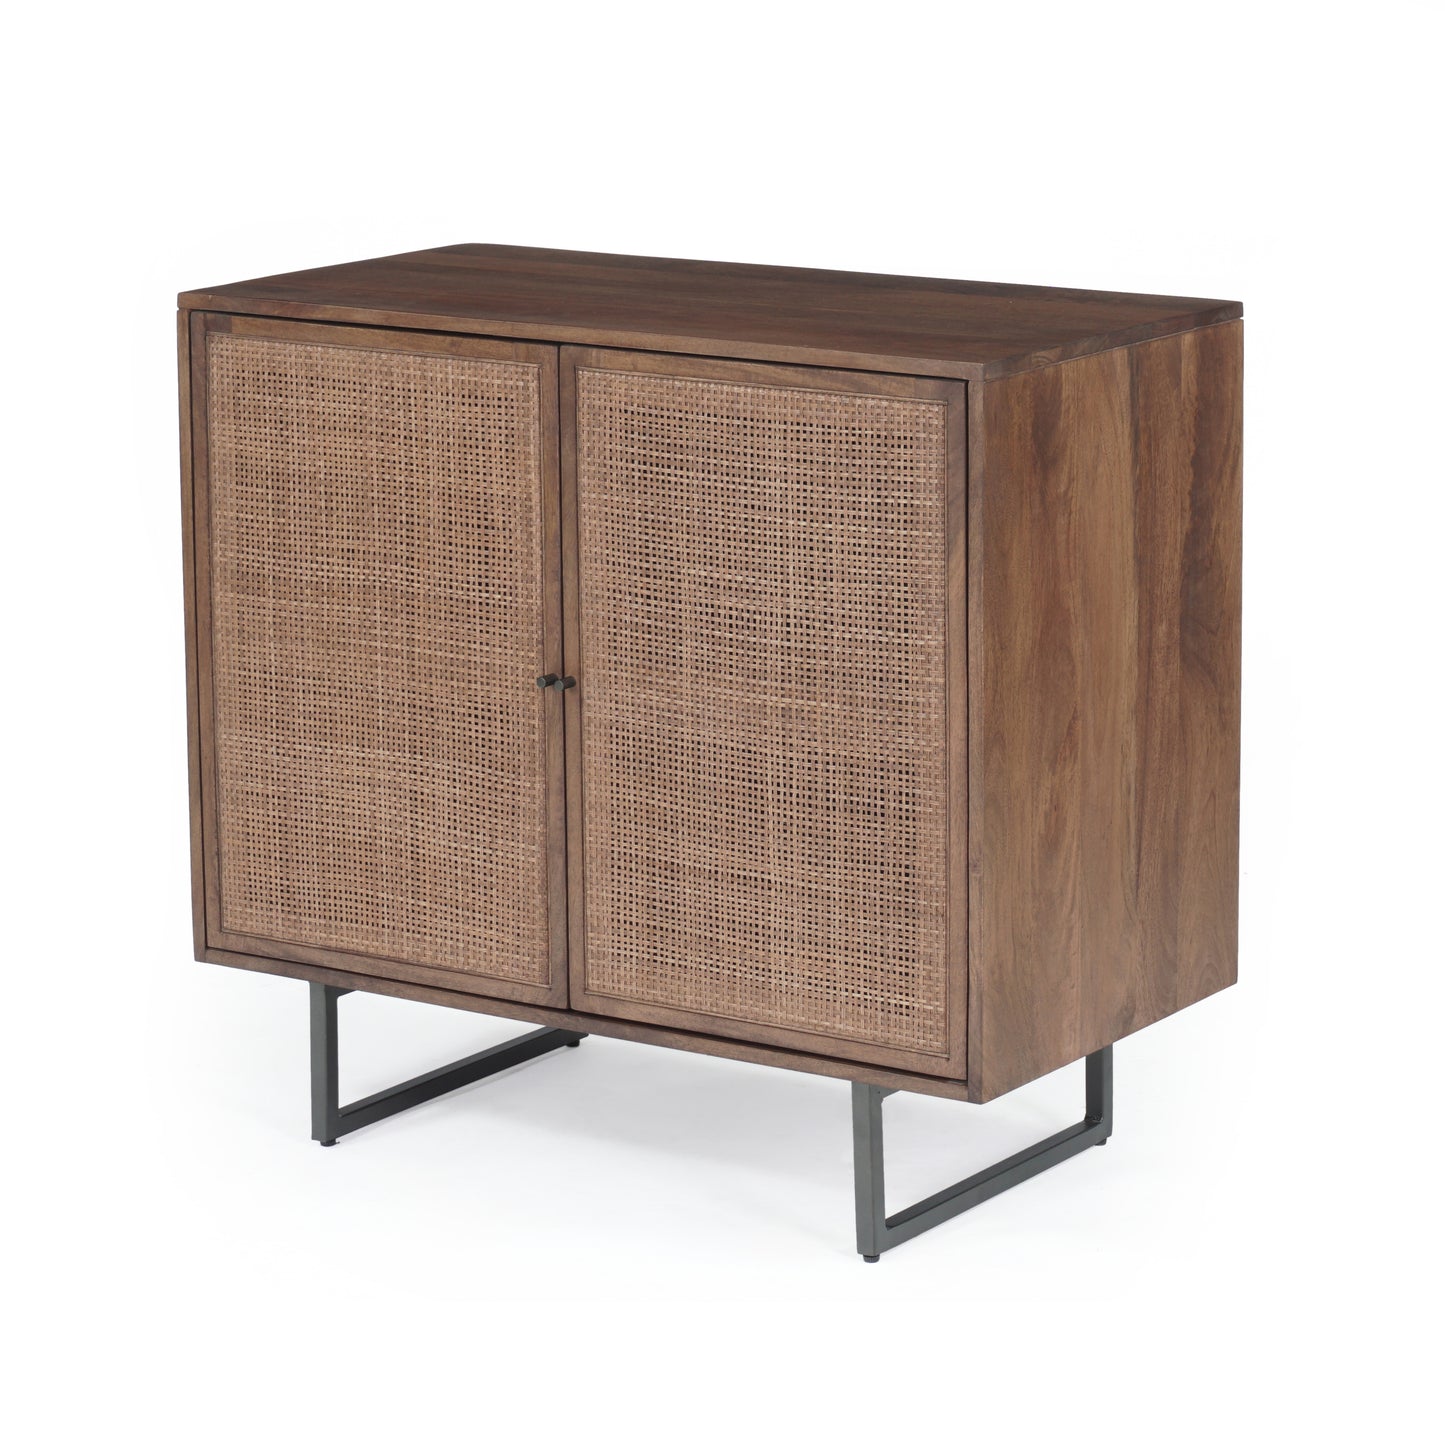 Carmel Small Cabinet Brown WashCabinets & Storage Four Hands  Brown Wash   Four Hands, Mid Century Modern Furniture, Old Bones Furniture Company, Old Bones Co, Modern Mid Century, Designer Furniture, https://www.oldbonesco.com/